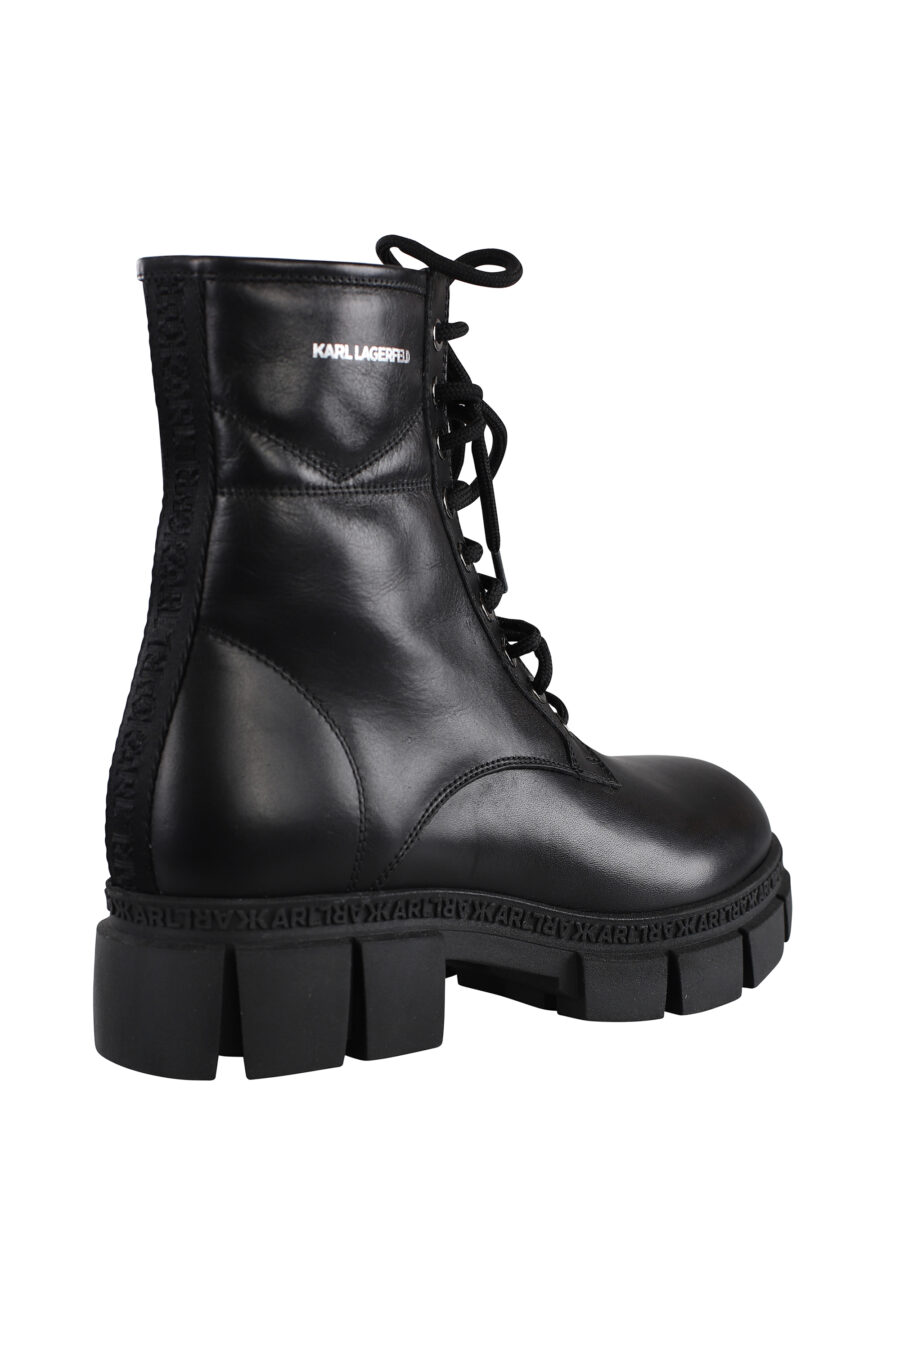 Black lace-up ankle boots with small white logo - IMG 7114